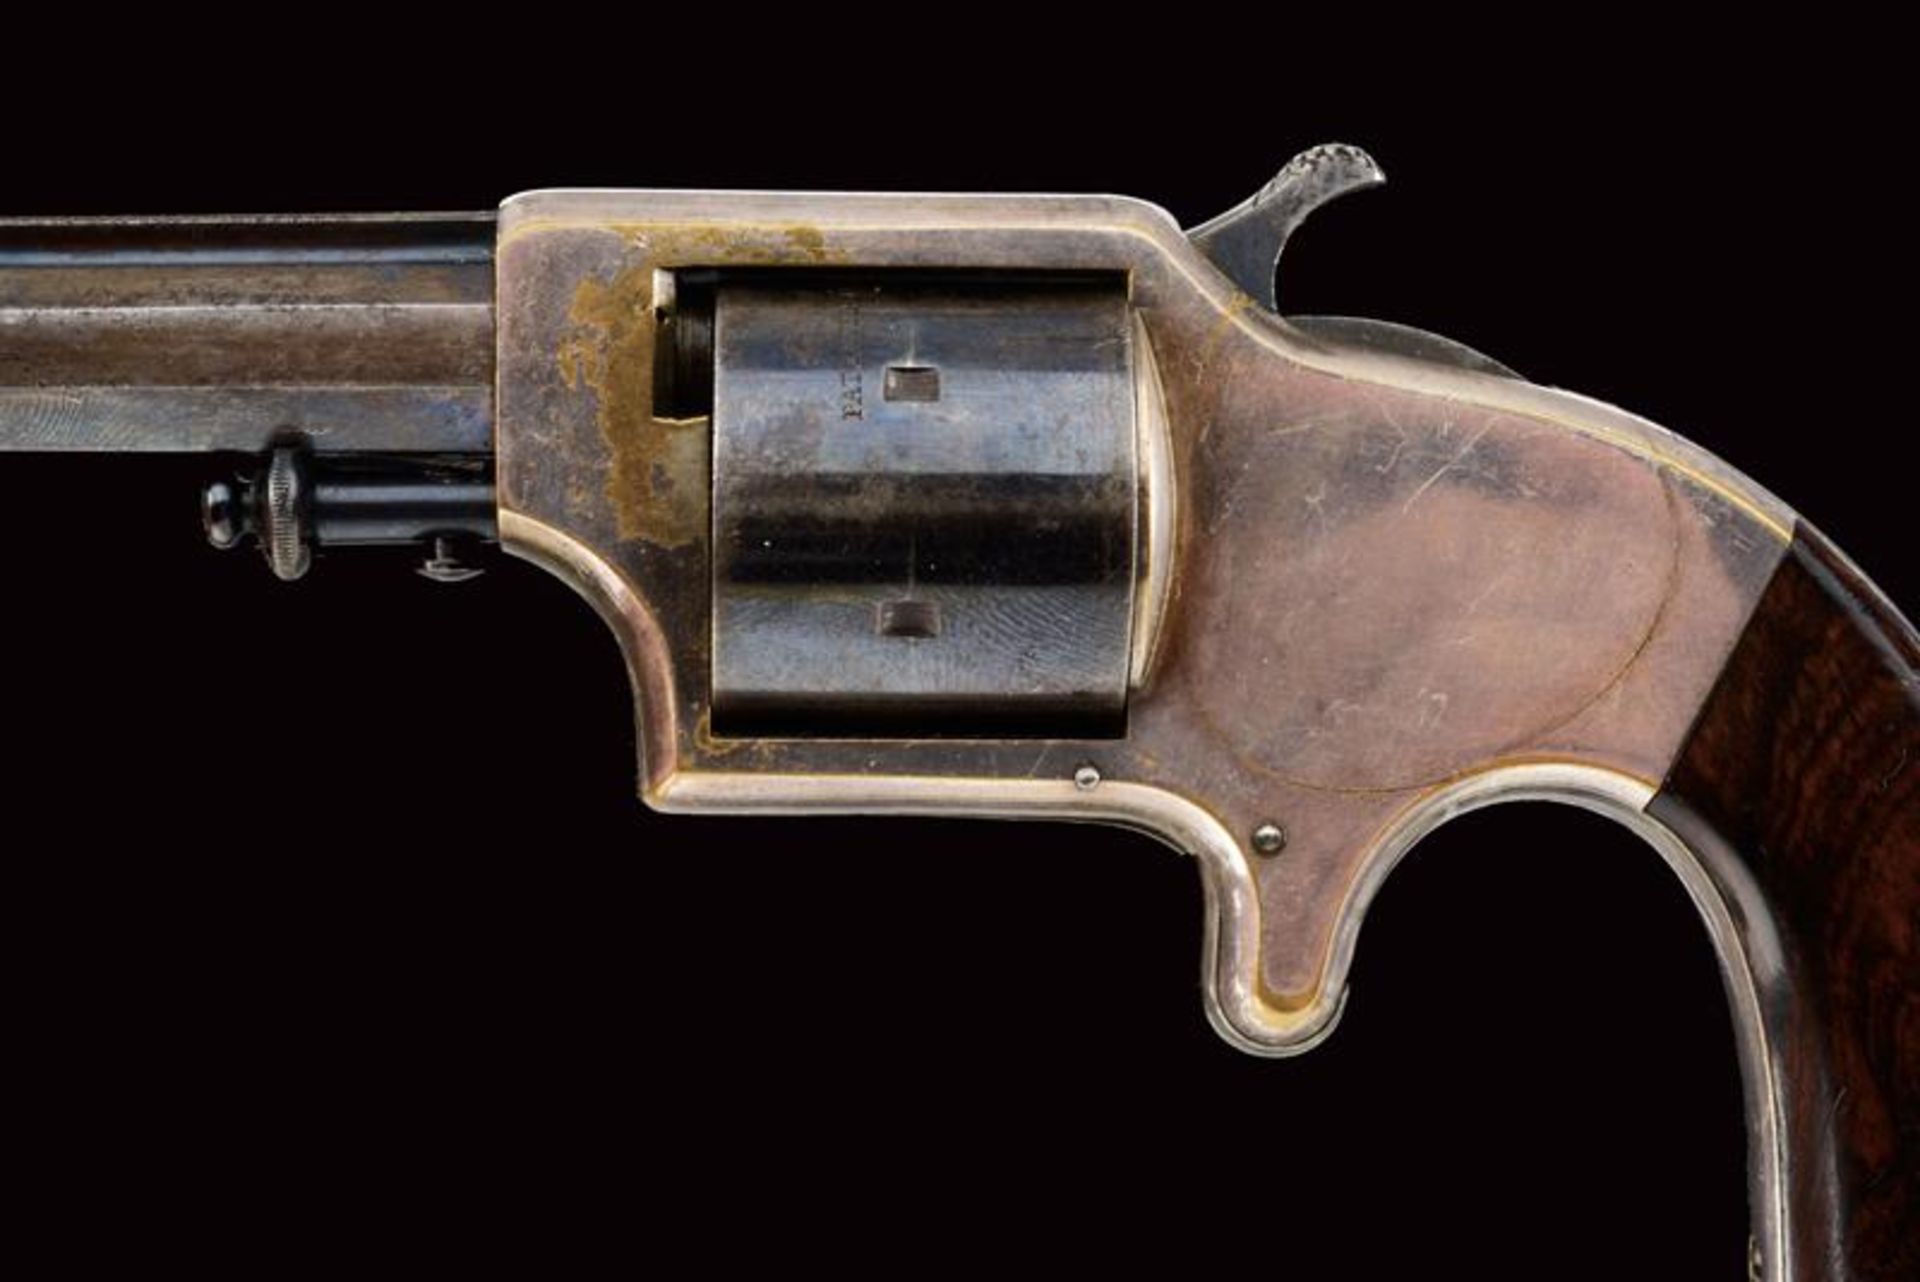 A Plant's Mfg. Co. Front Loading Pocket Revolver - Image 4 of 7